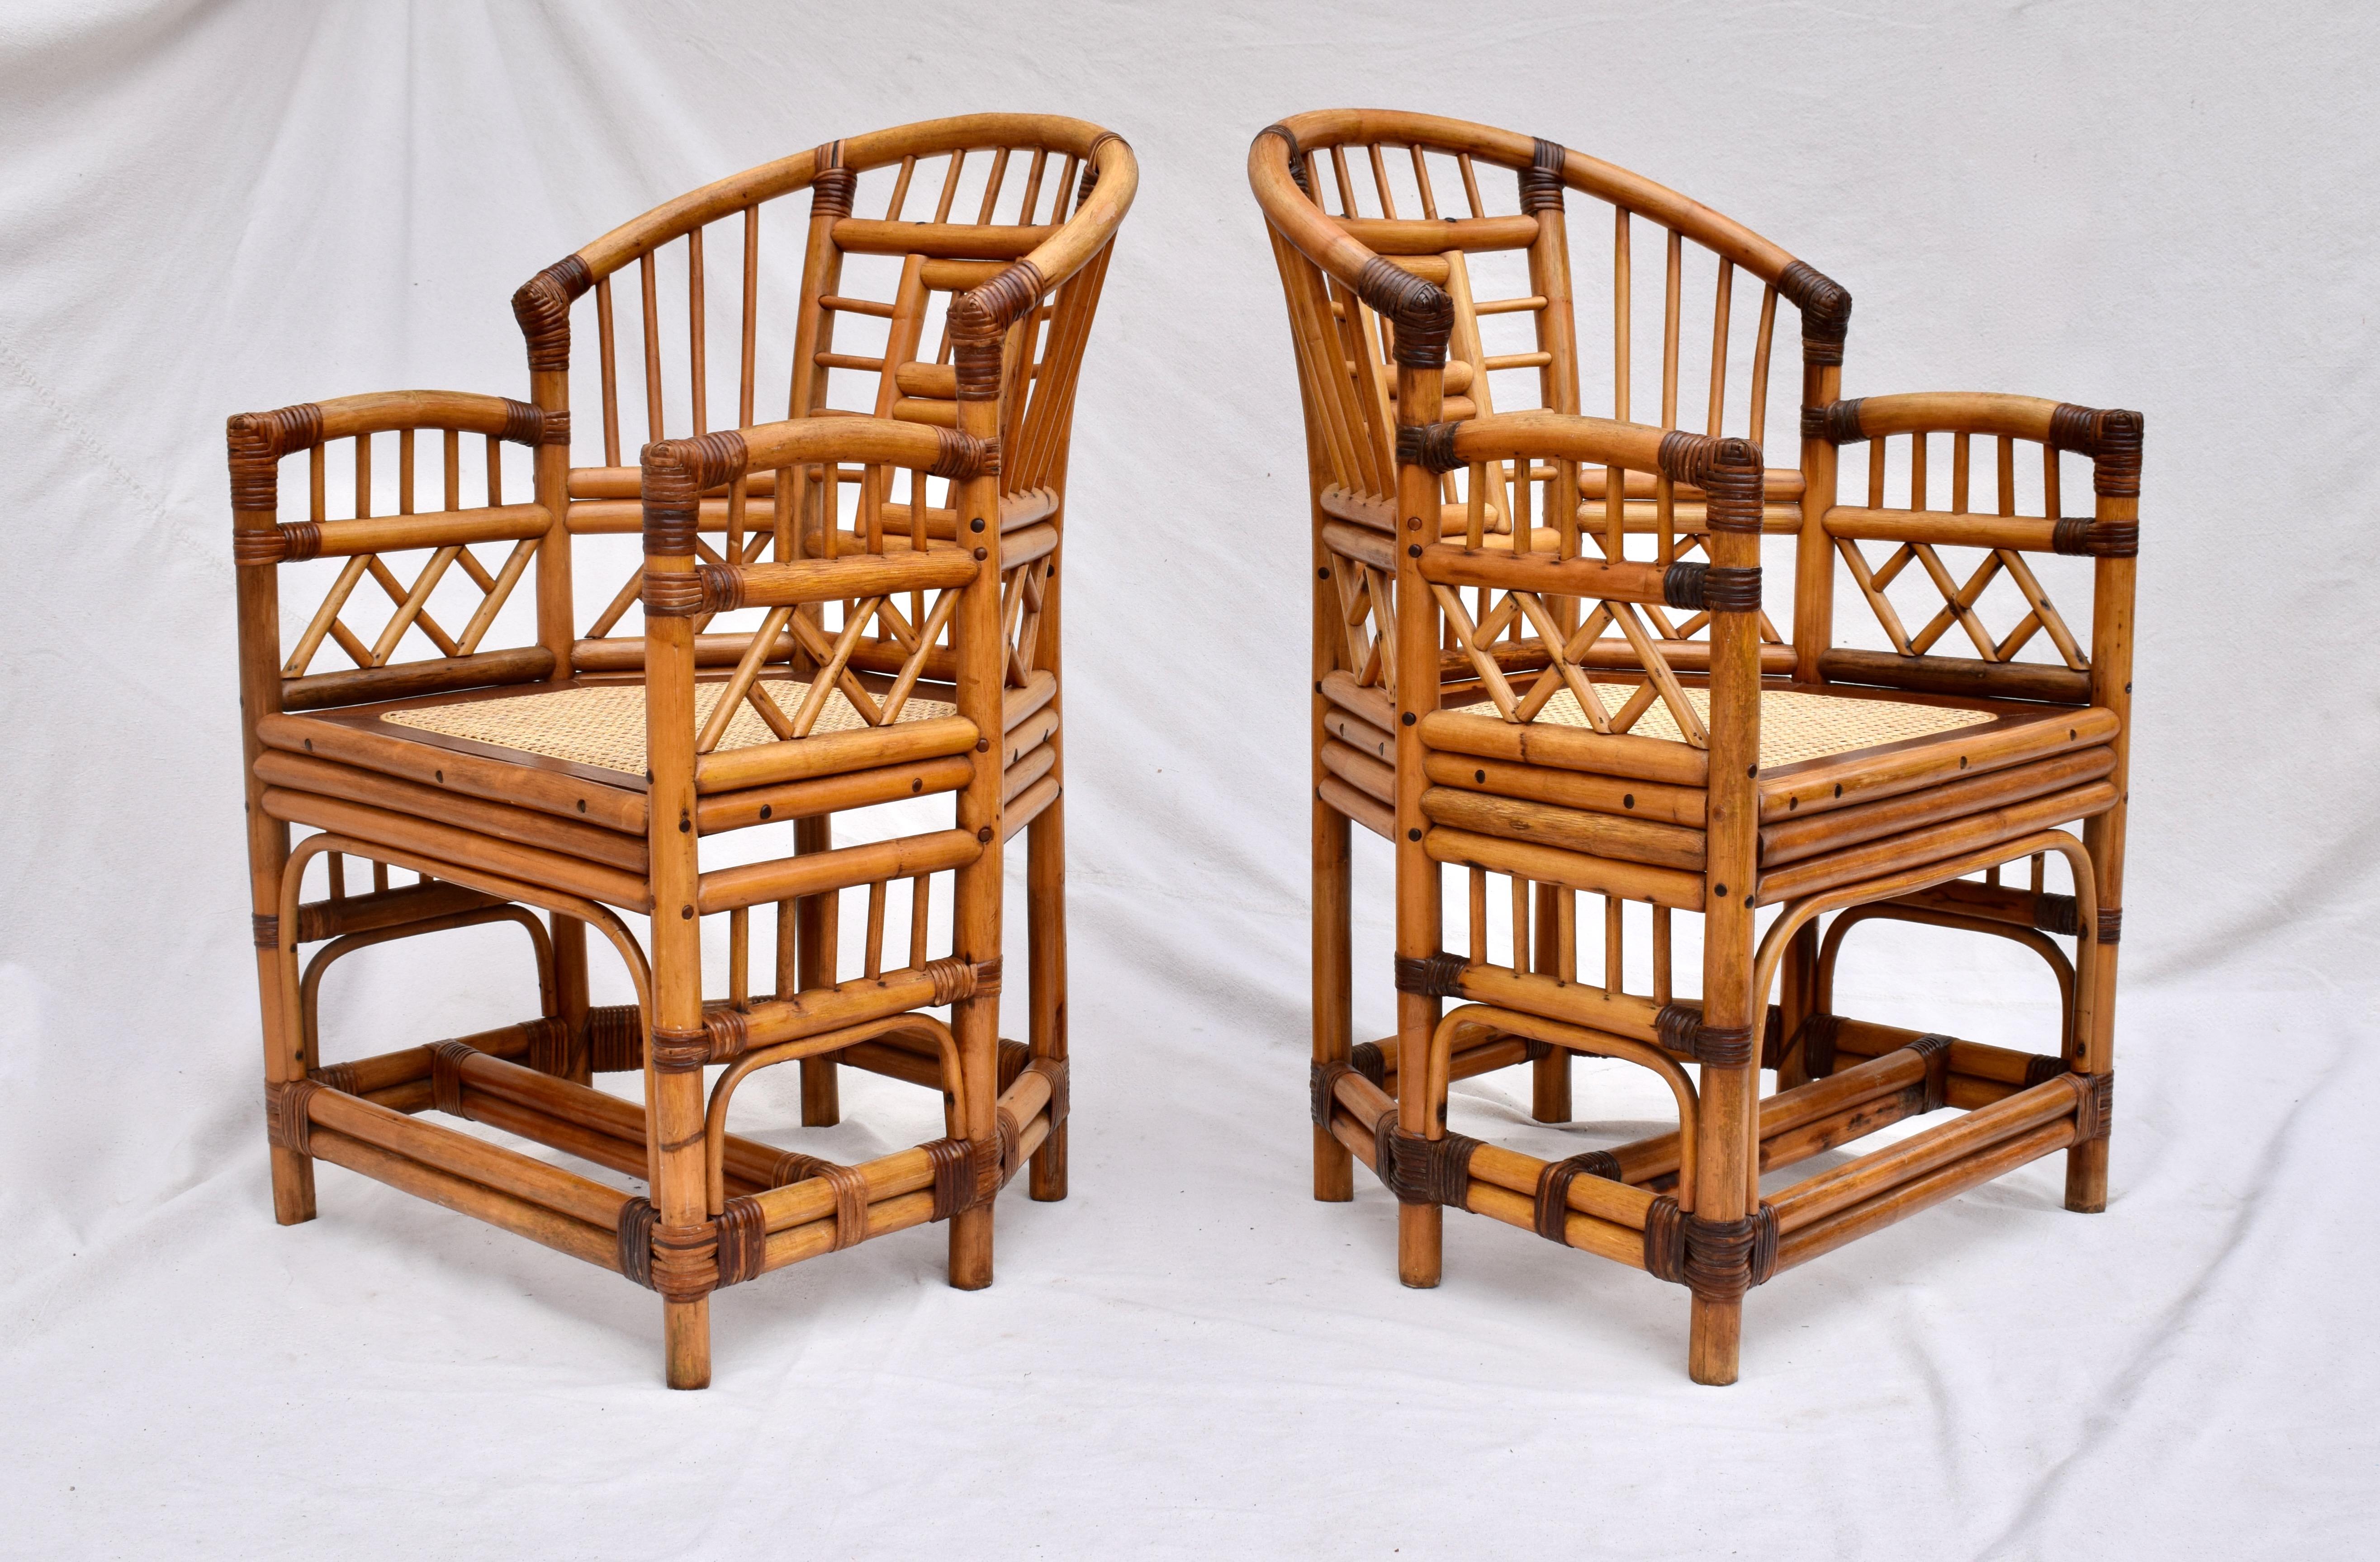 Pair of 1950s Brighton Pavilion chairs fully restored with heavy bamboo frames, new caned seats & solid Mahogany seat frames. .These older versions boast r.ock solid heirloom quality & construction with substantial weight. Seats: 17